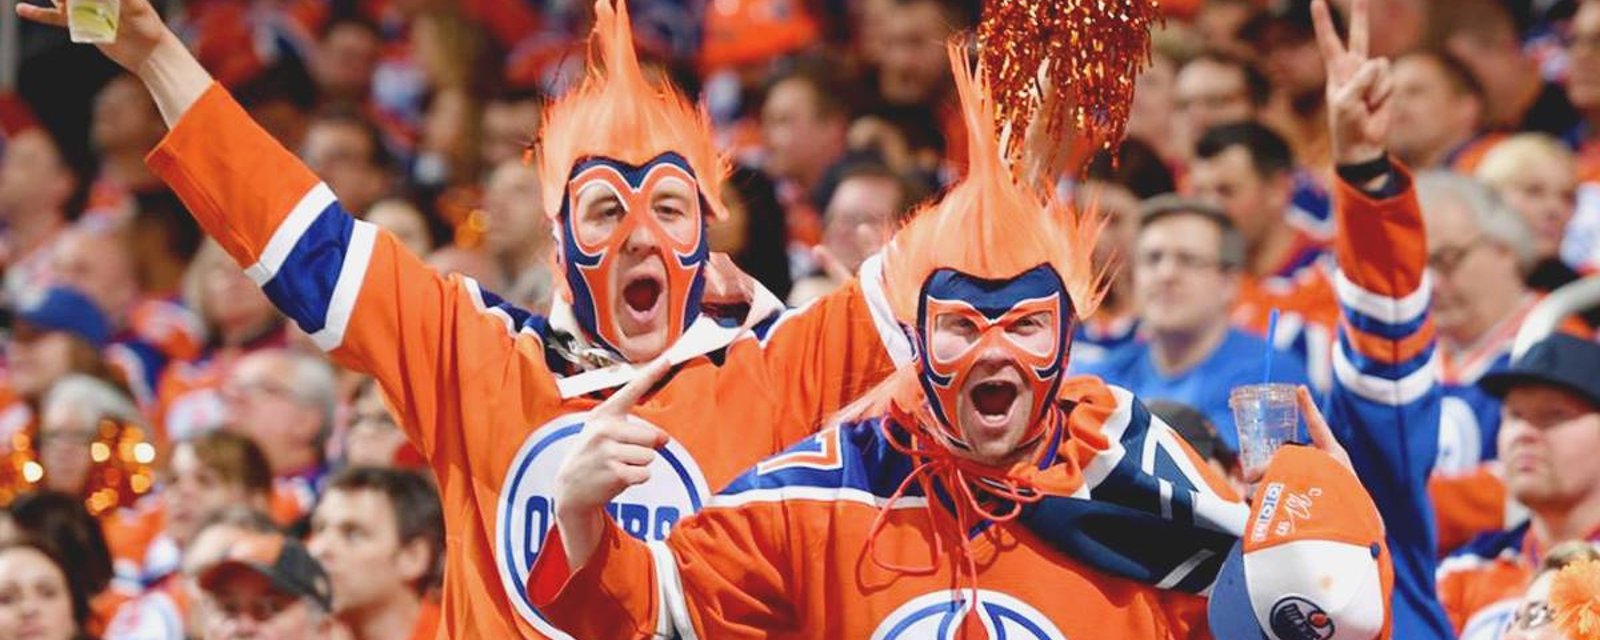 MUST SEE: Adorable Oilers fan rides the roller-coaster of Playoff emotions